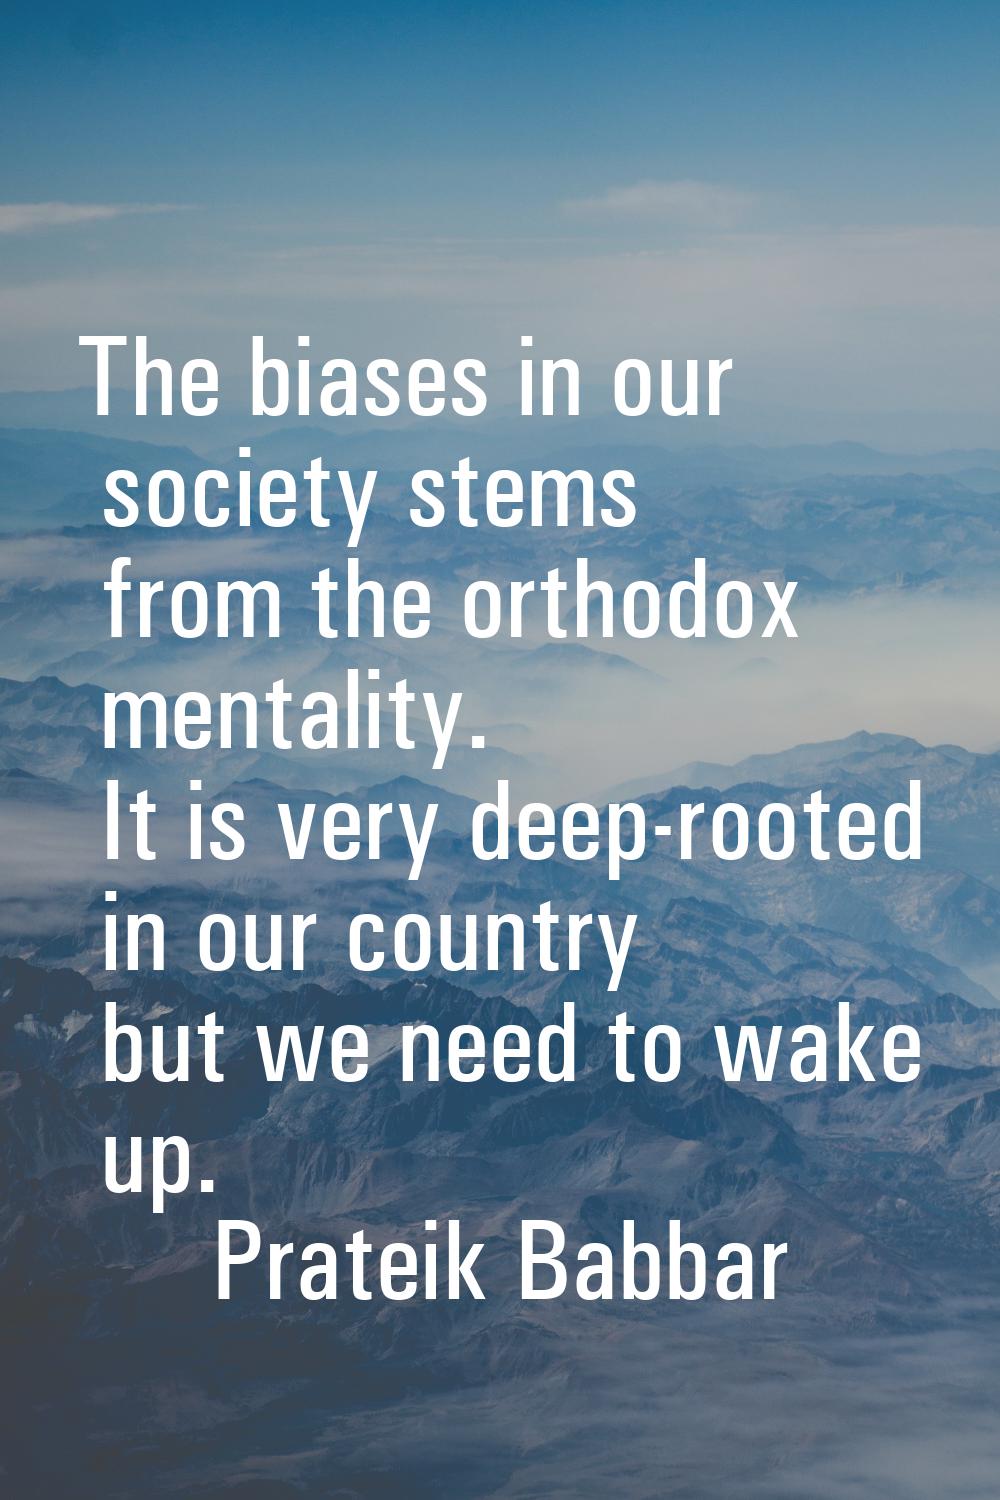 The biases in our society stems from the orthodox mentality. It is very deep-rooted in our country 